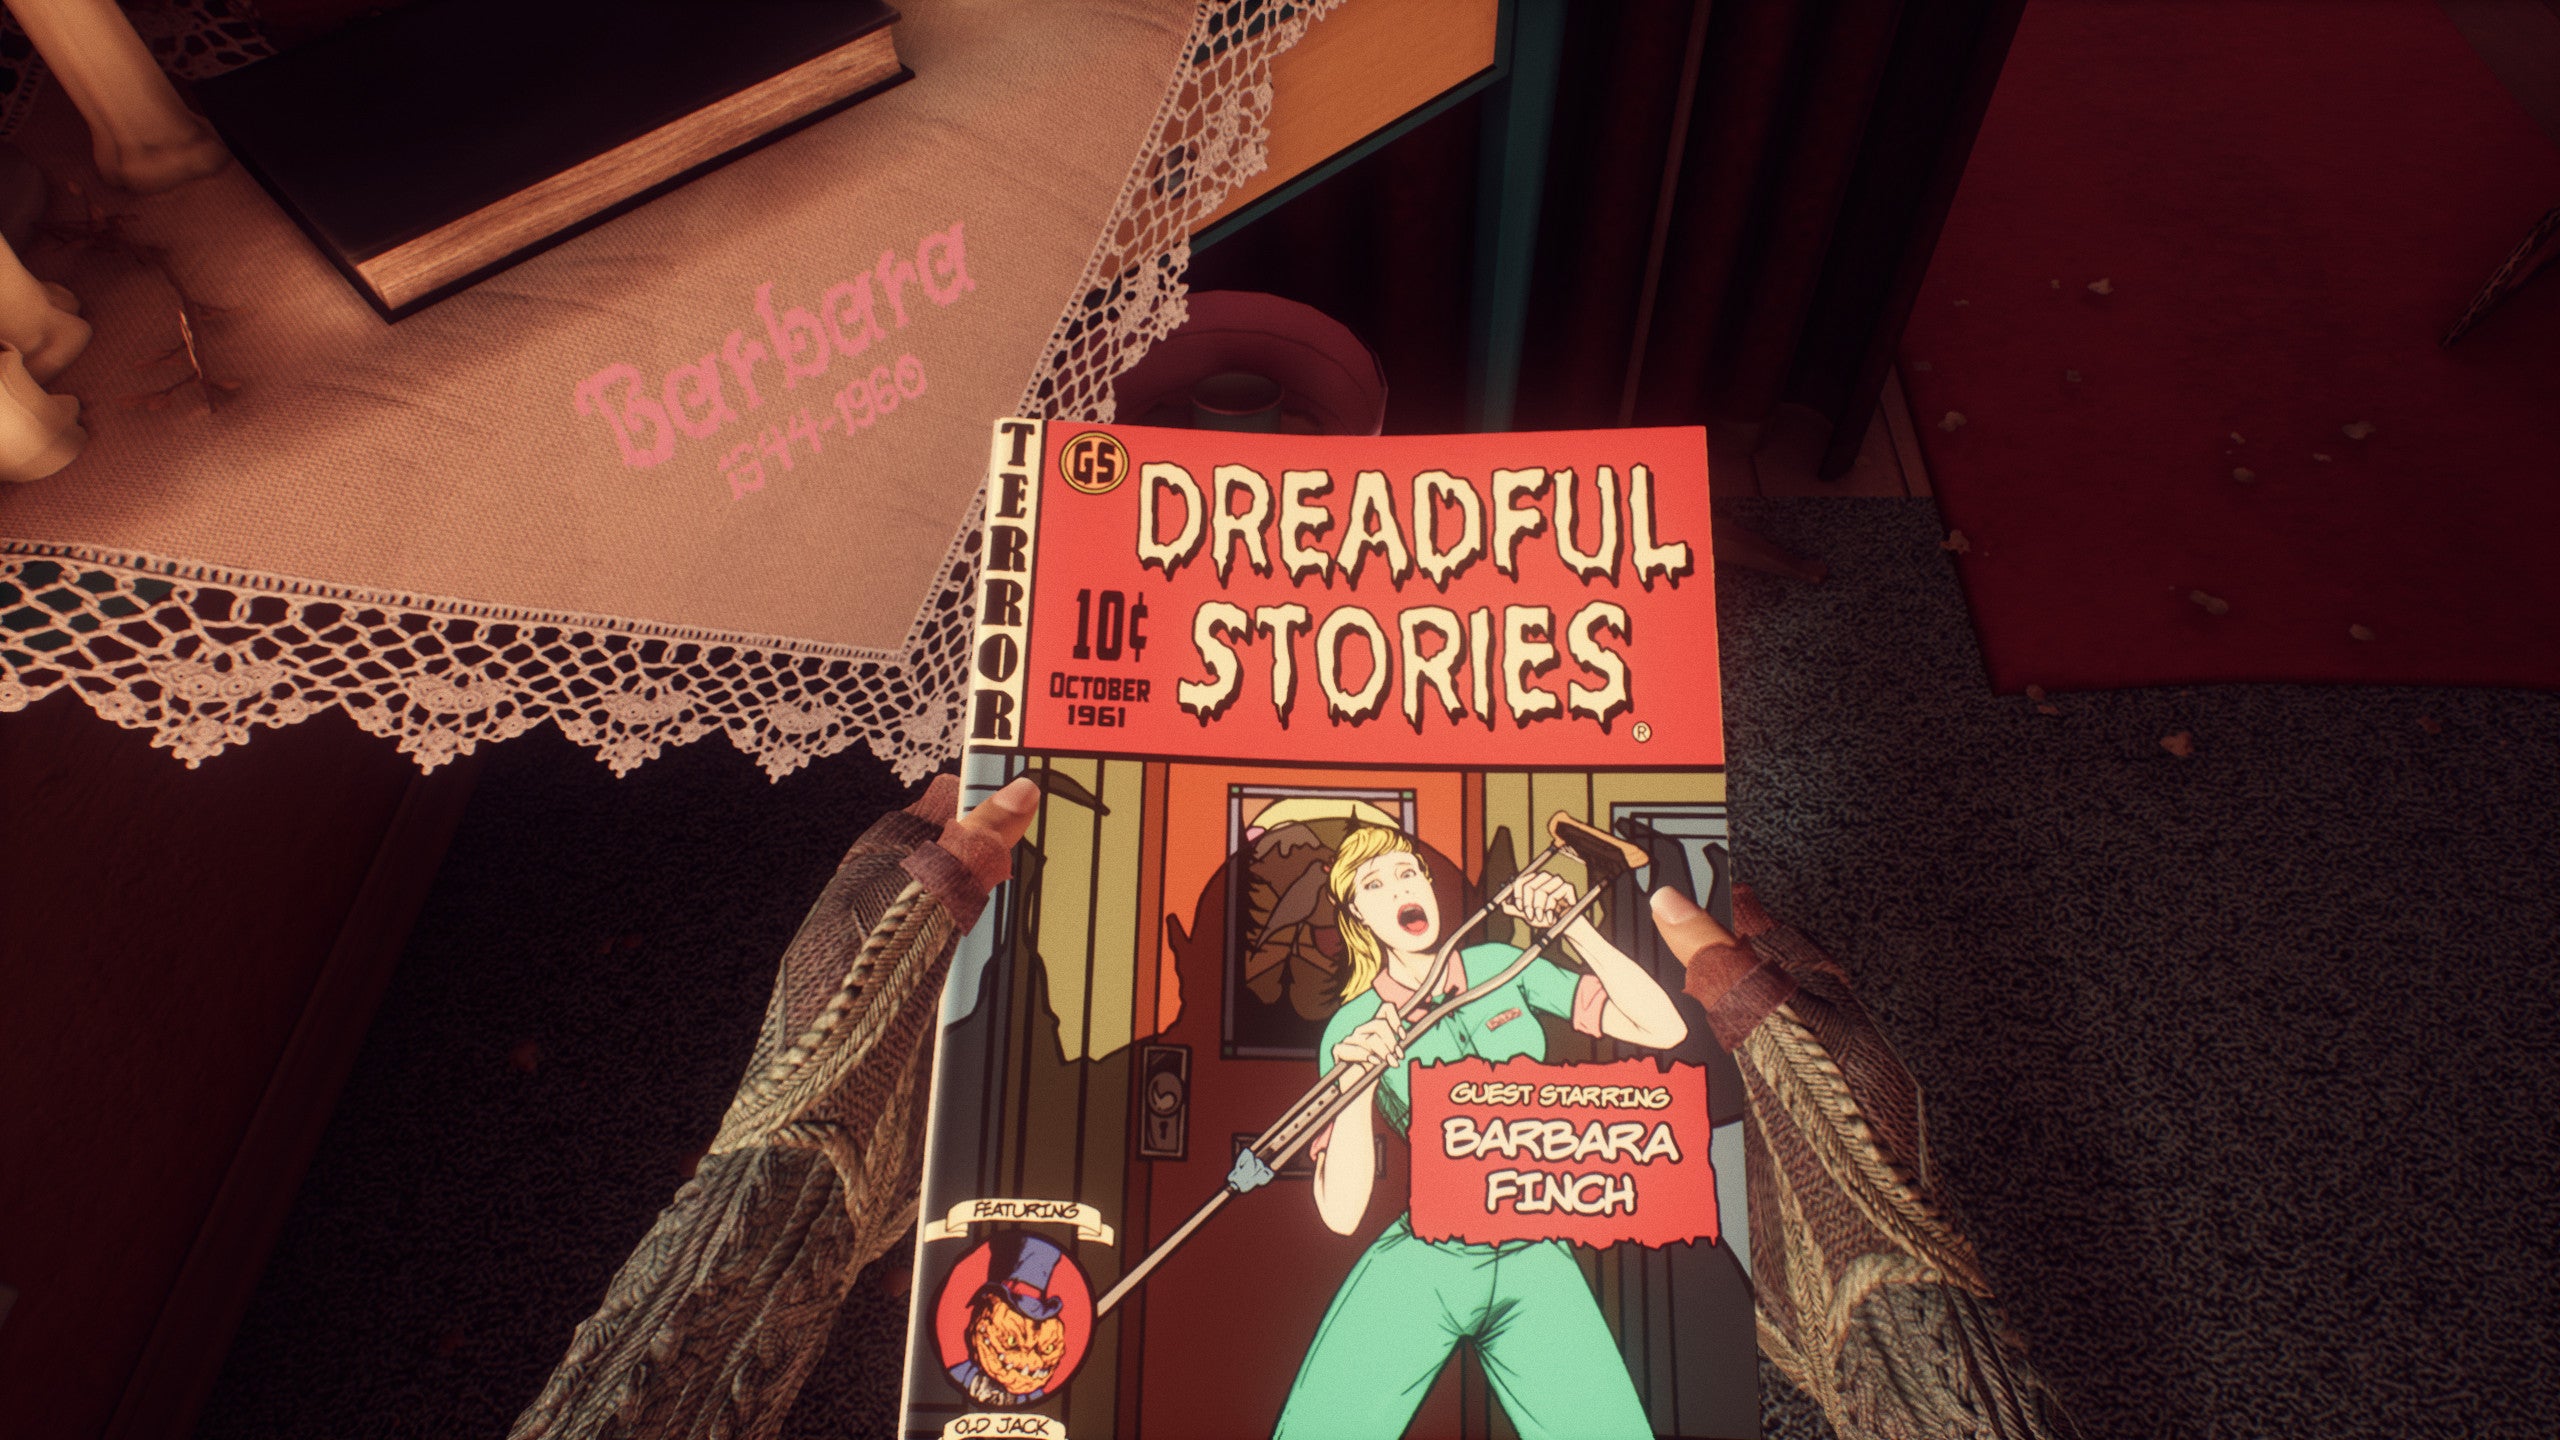 A Dreadful Stories comic book in a What Remains of Edith Finch screenshot.